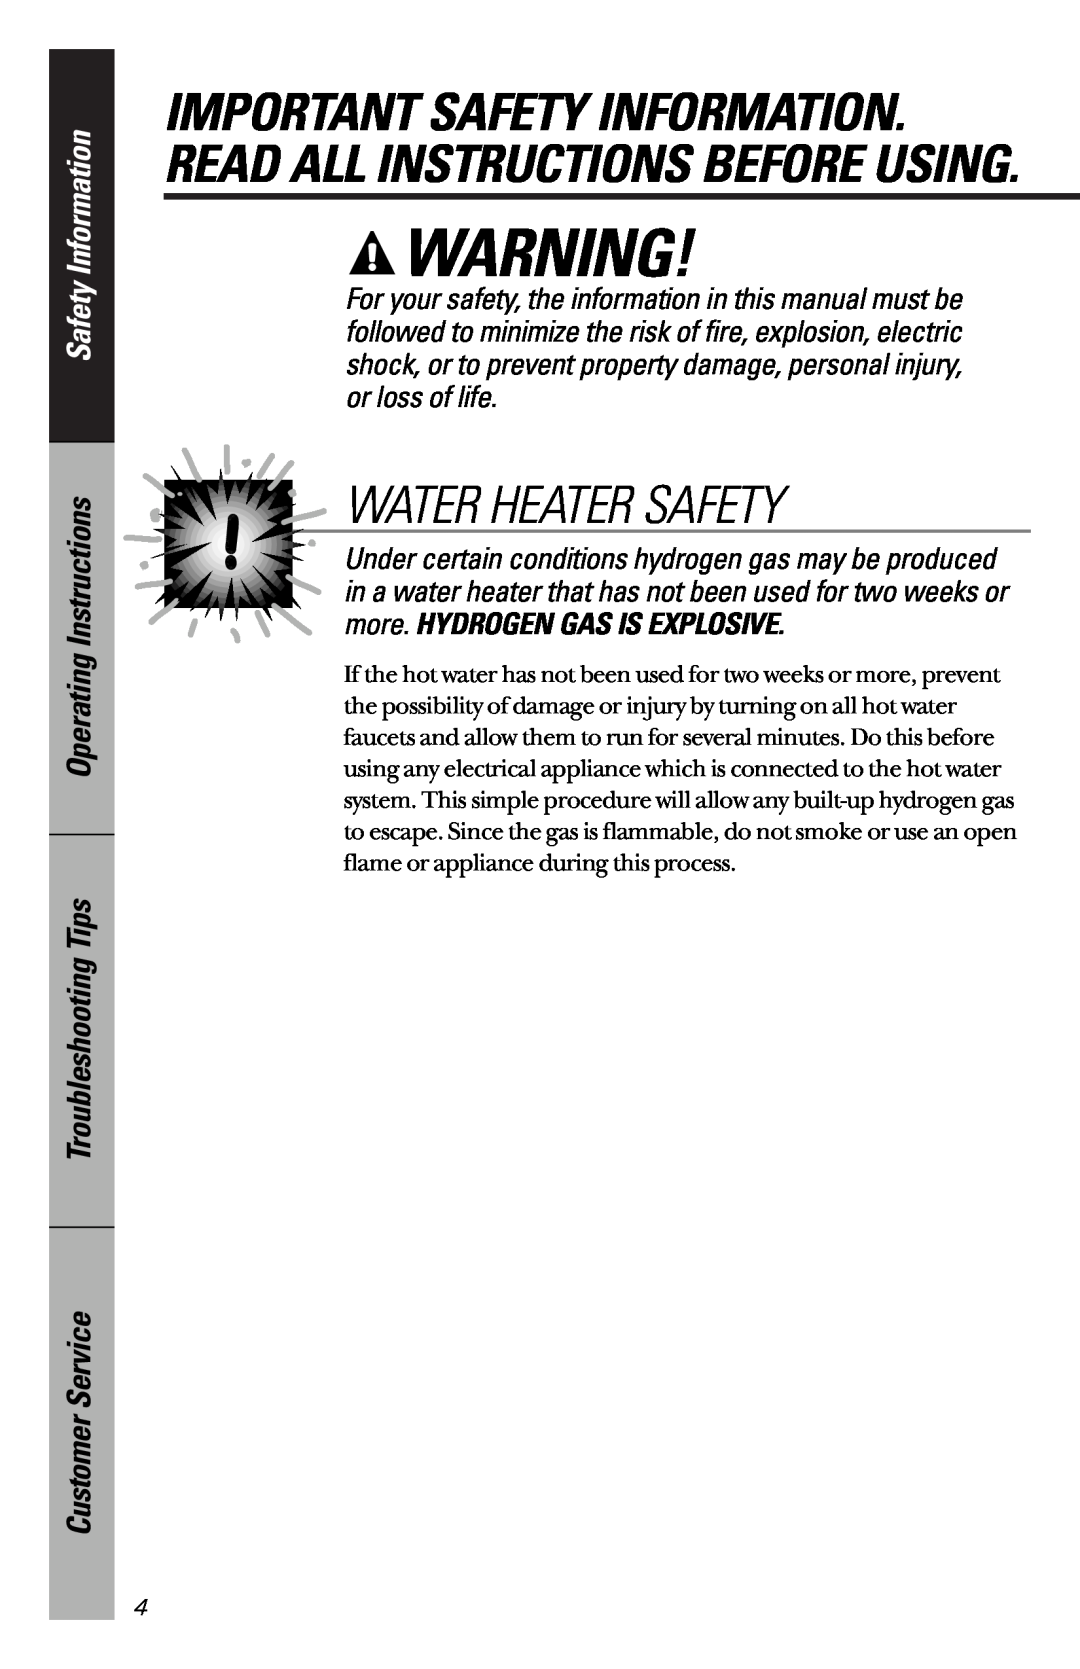 GE GSD5910, GSDL352 Water Heater Safety, Safety Information, Operating Instructions Troubleshooting Tips, Customer Service 